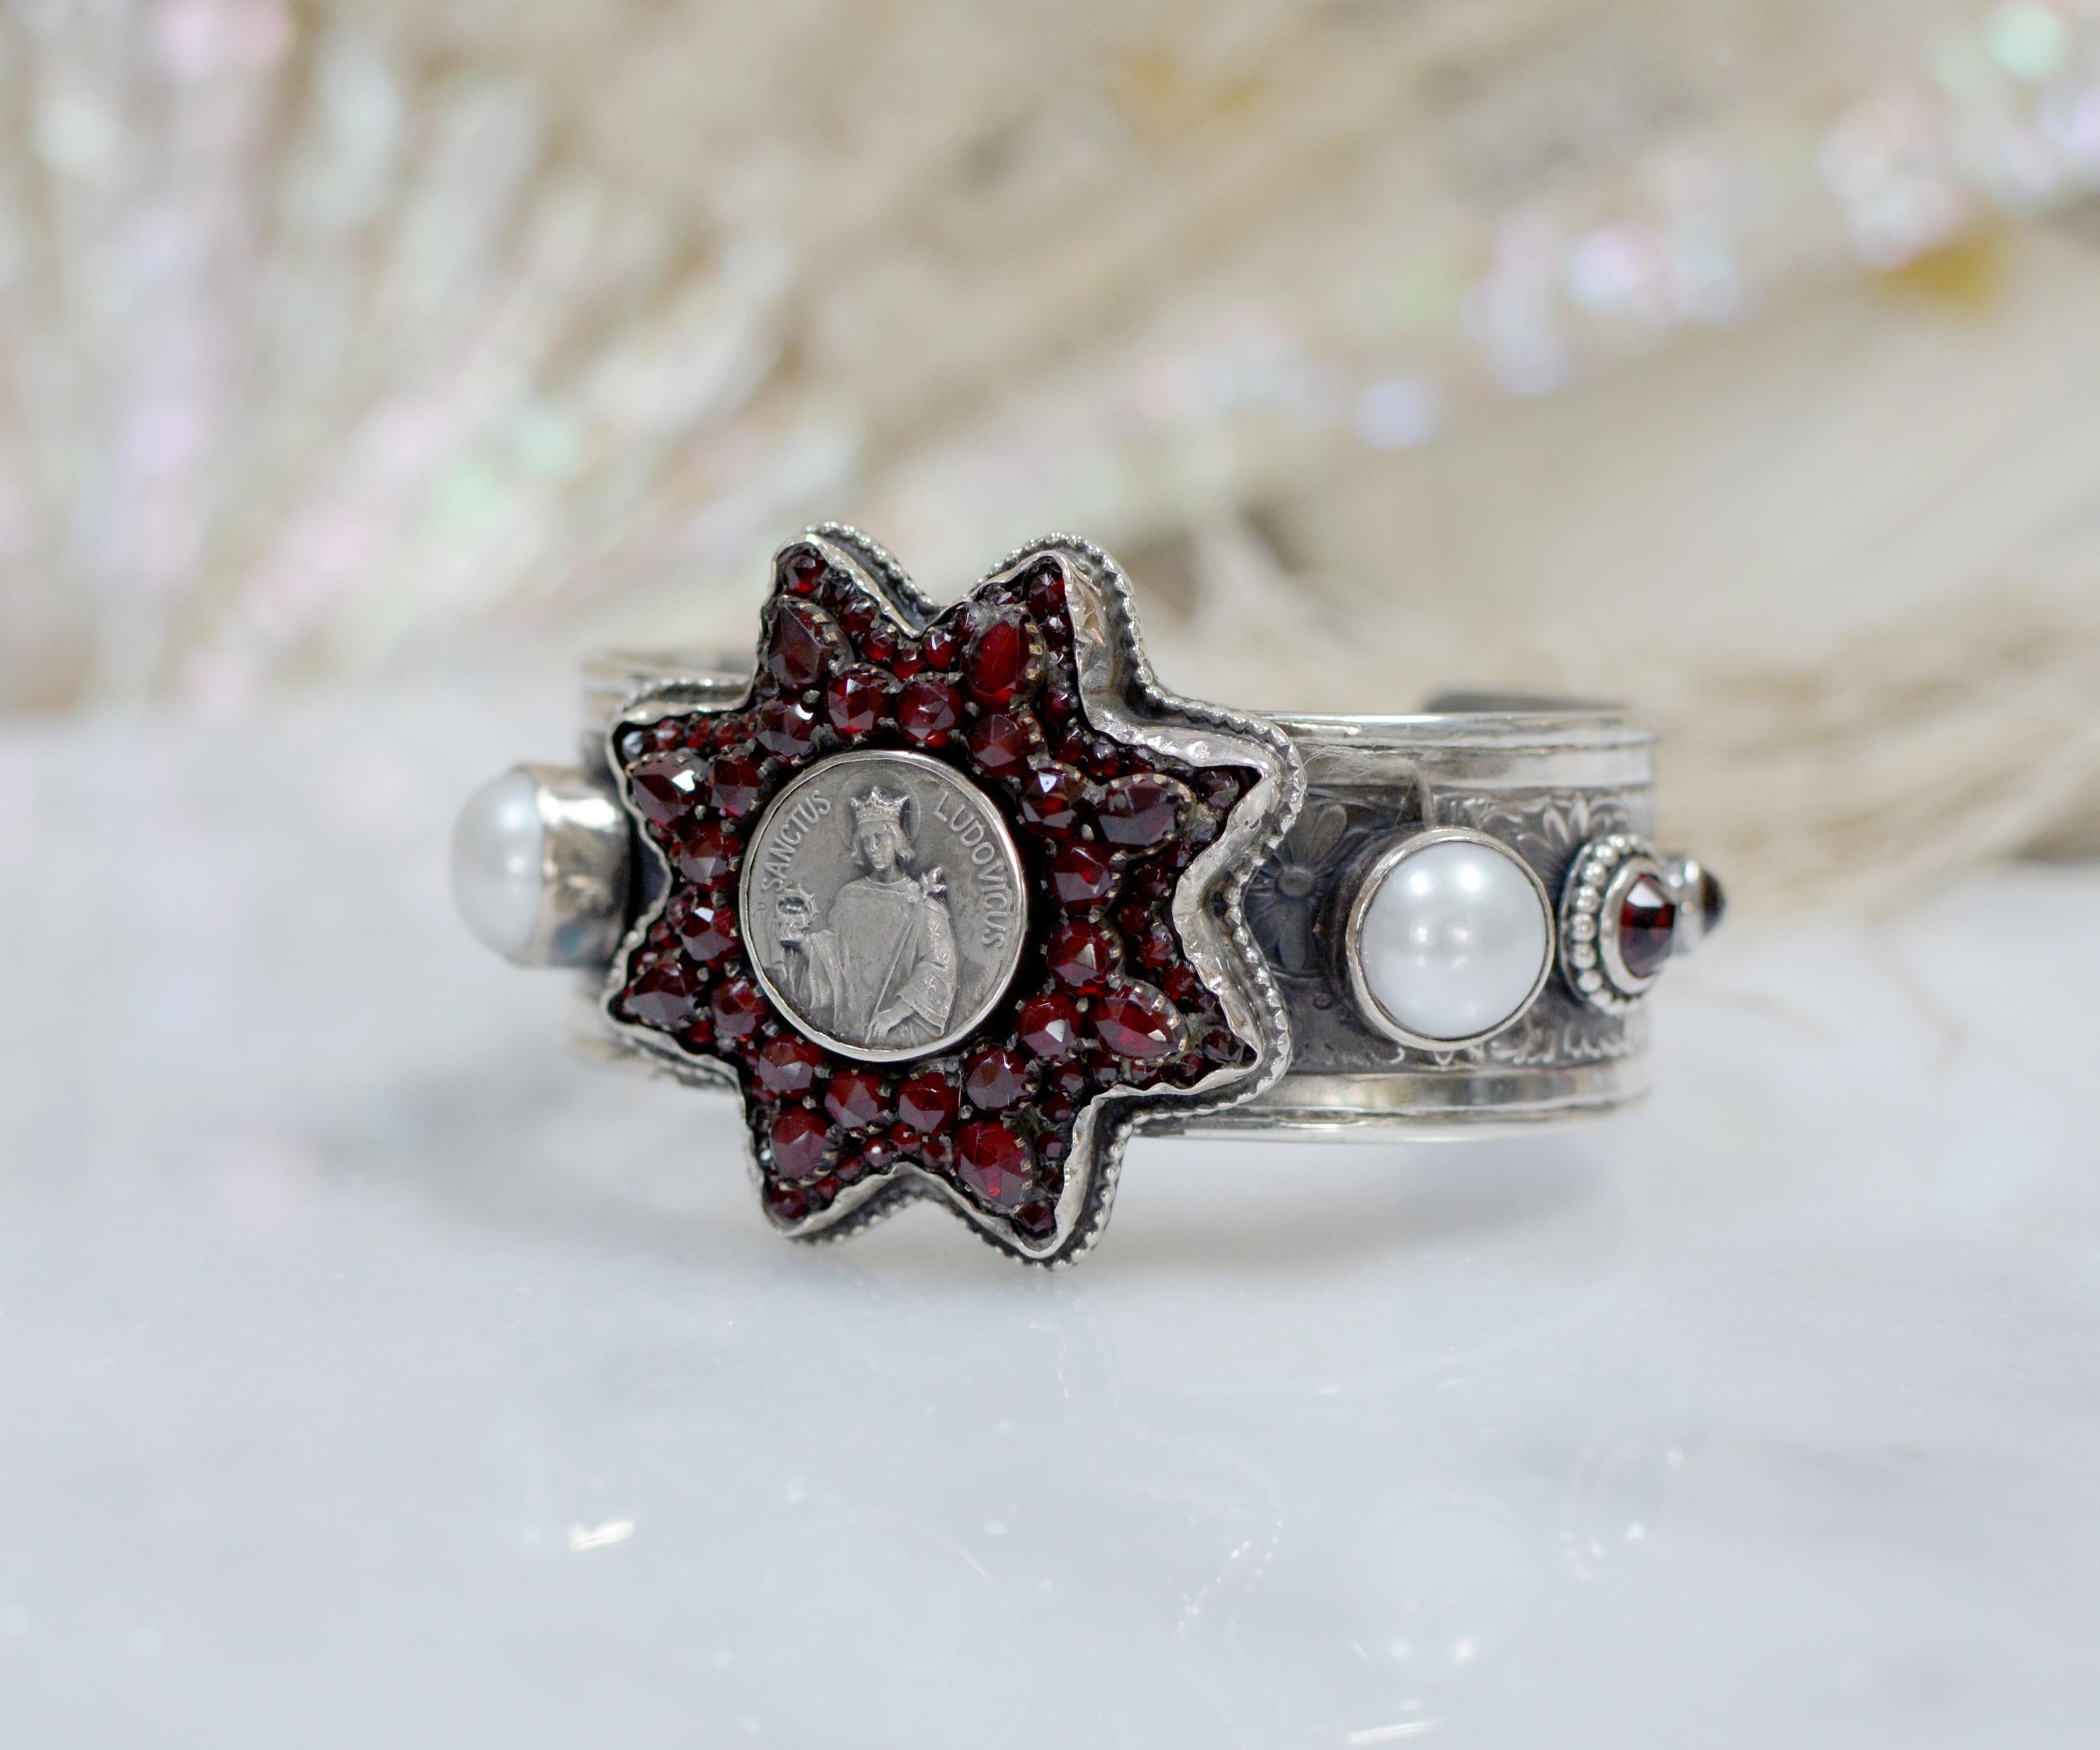 This treasure of a bracelet from designer Jill Garber features an exquisite antique Victorian star having approximately 88 prong set, old rose cut Bohemian garnets. The eight pointed star magnificently encircles a nineteenth-century, French